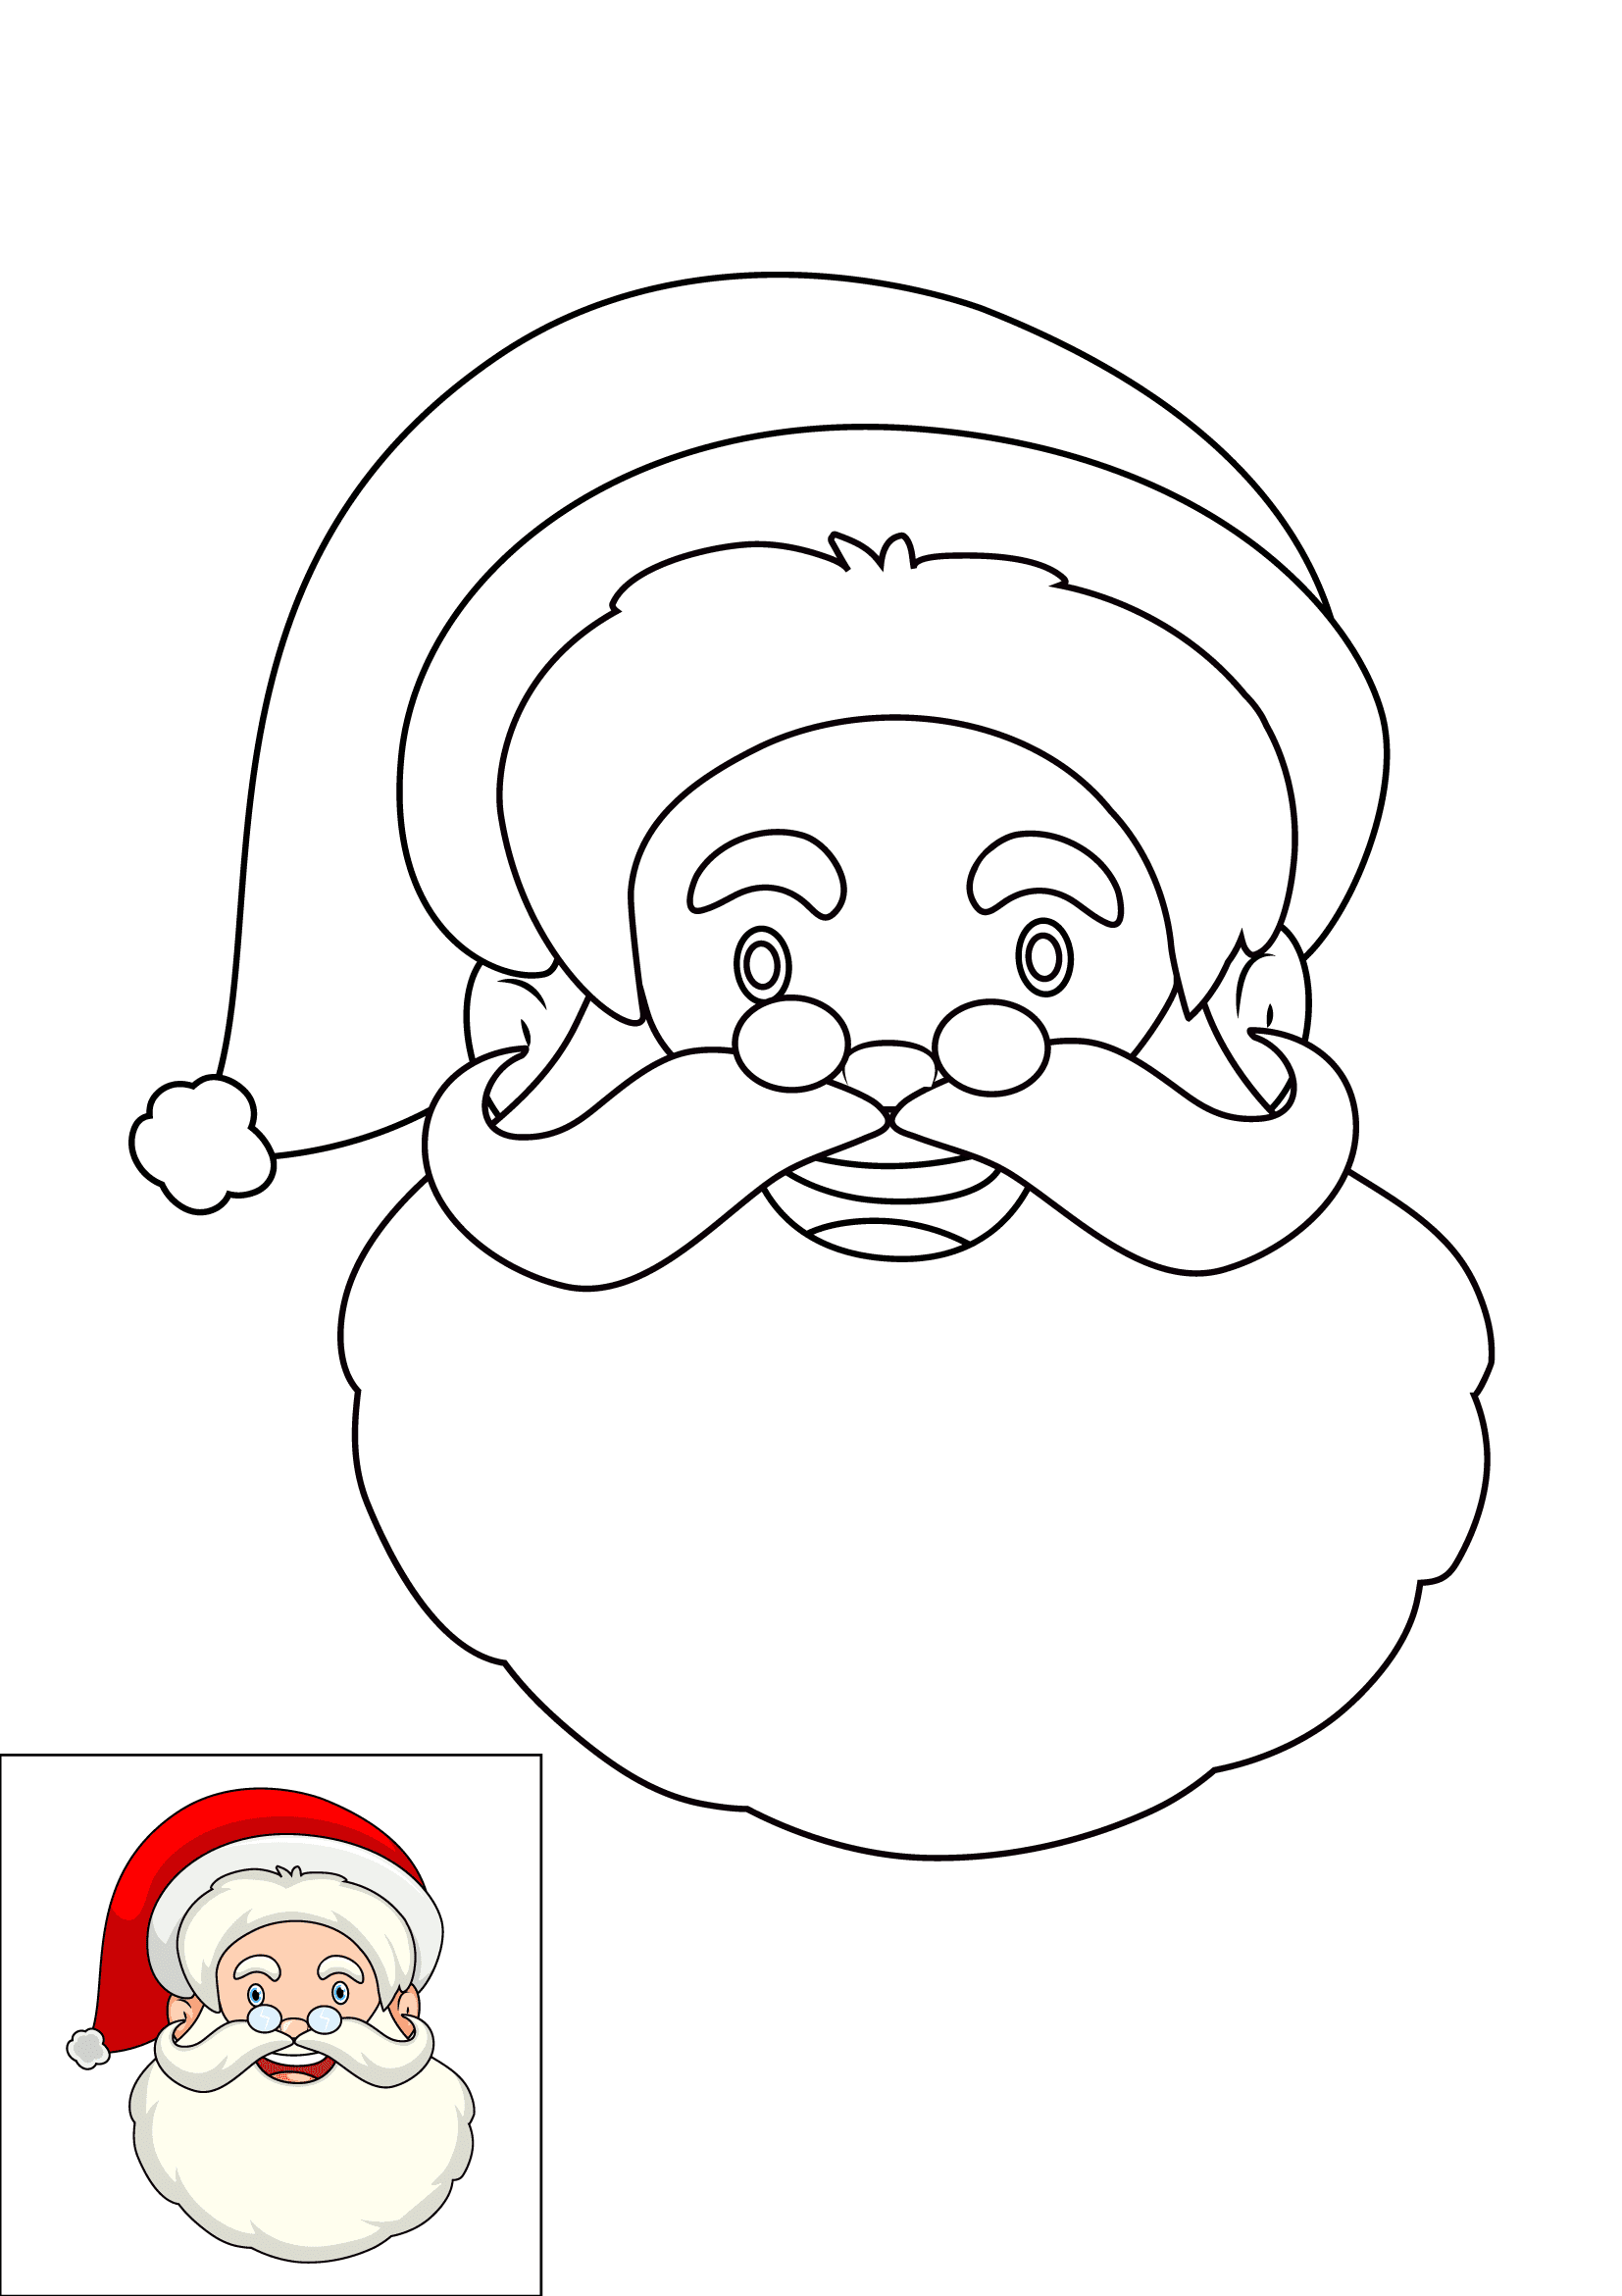 How to Draw A Santa Face Step by Step Printable Color